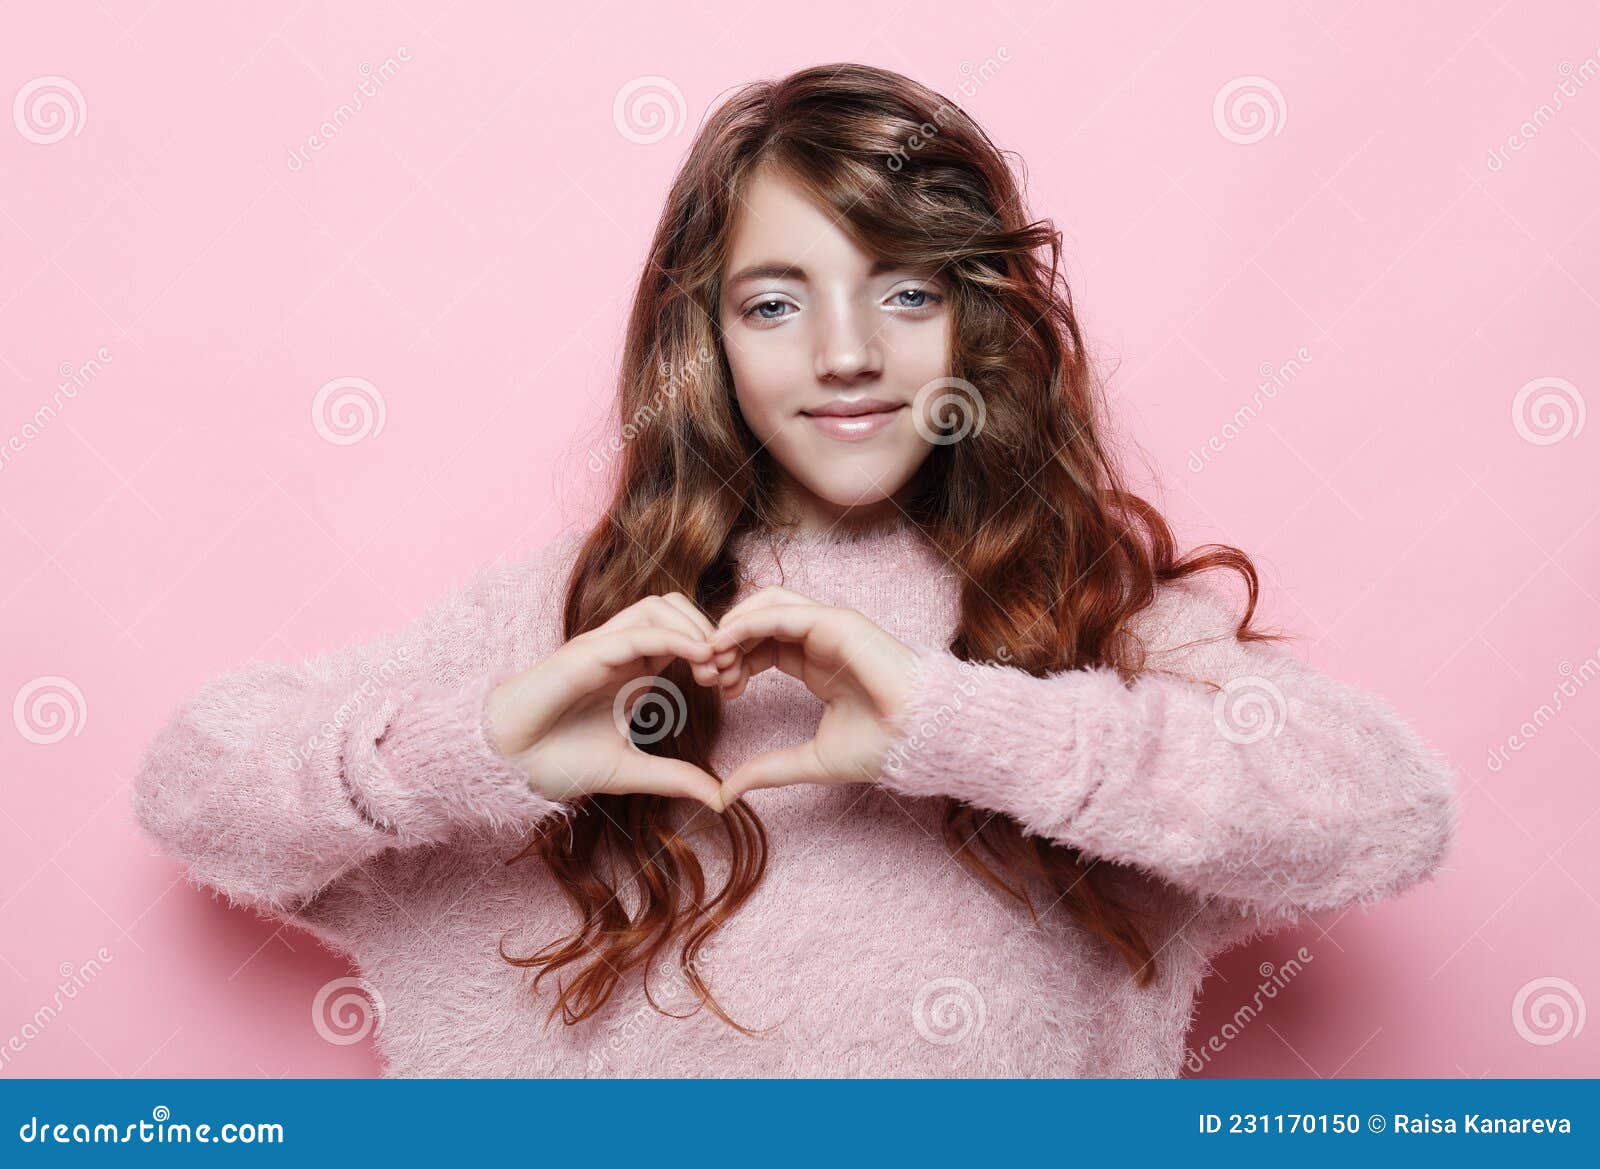 Love My Family and Friends. Stock Photo - Image of children, background:  231170150